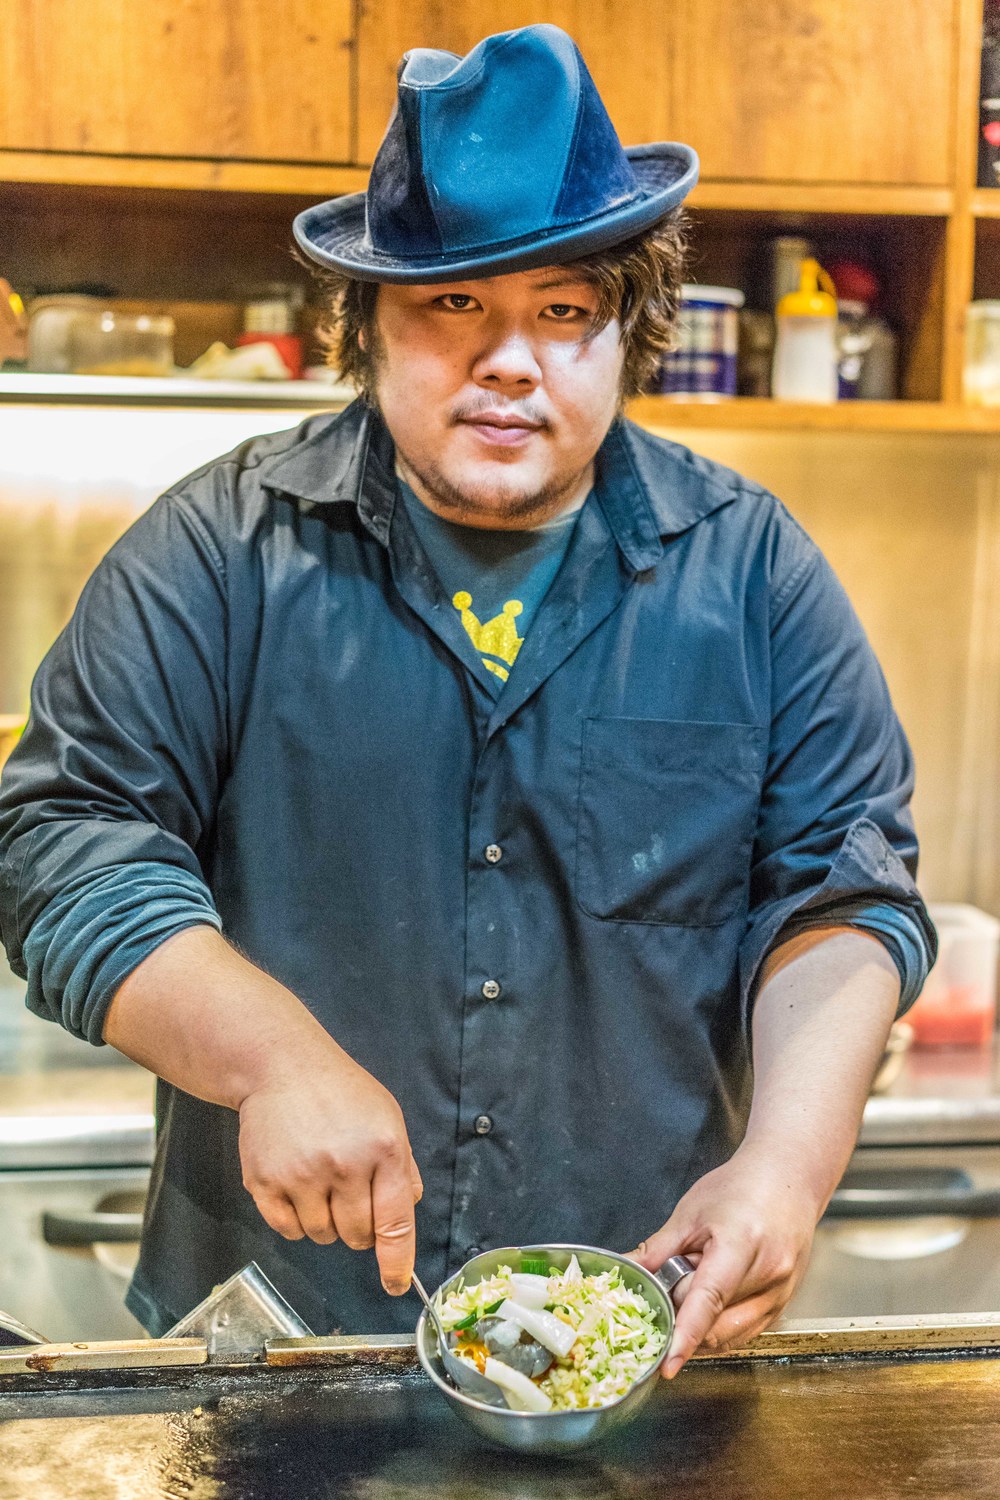 The owner/ chef who prepared the okonomiyaki before bringing it to the table for us. 